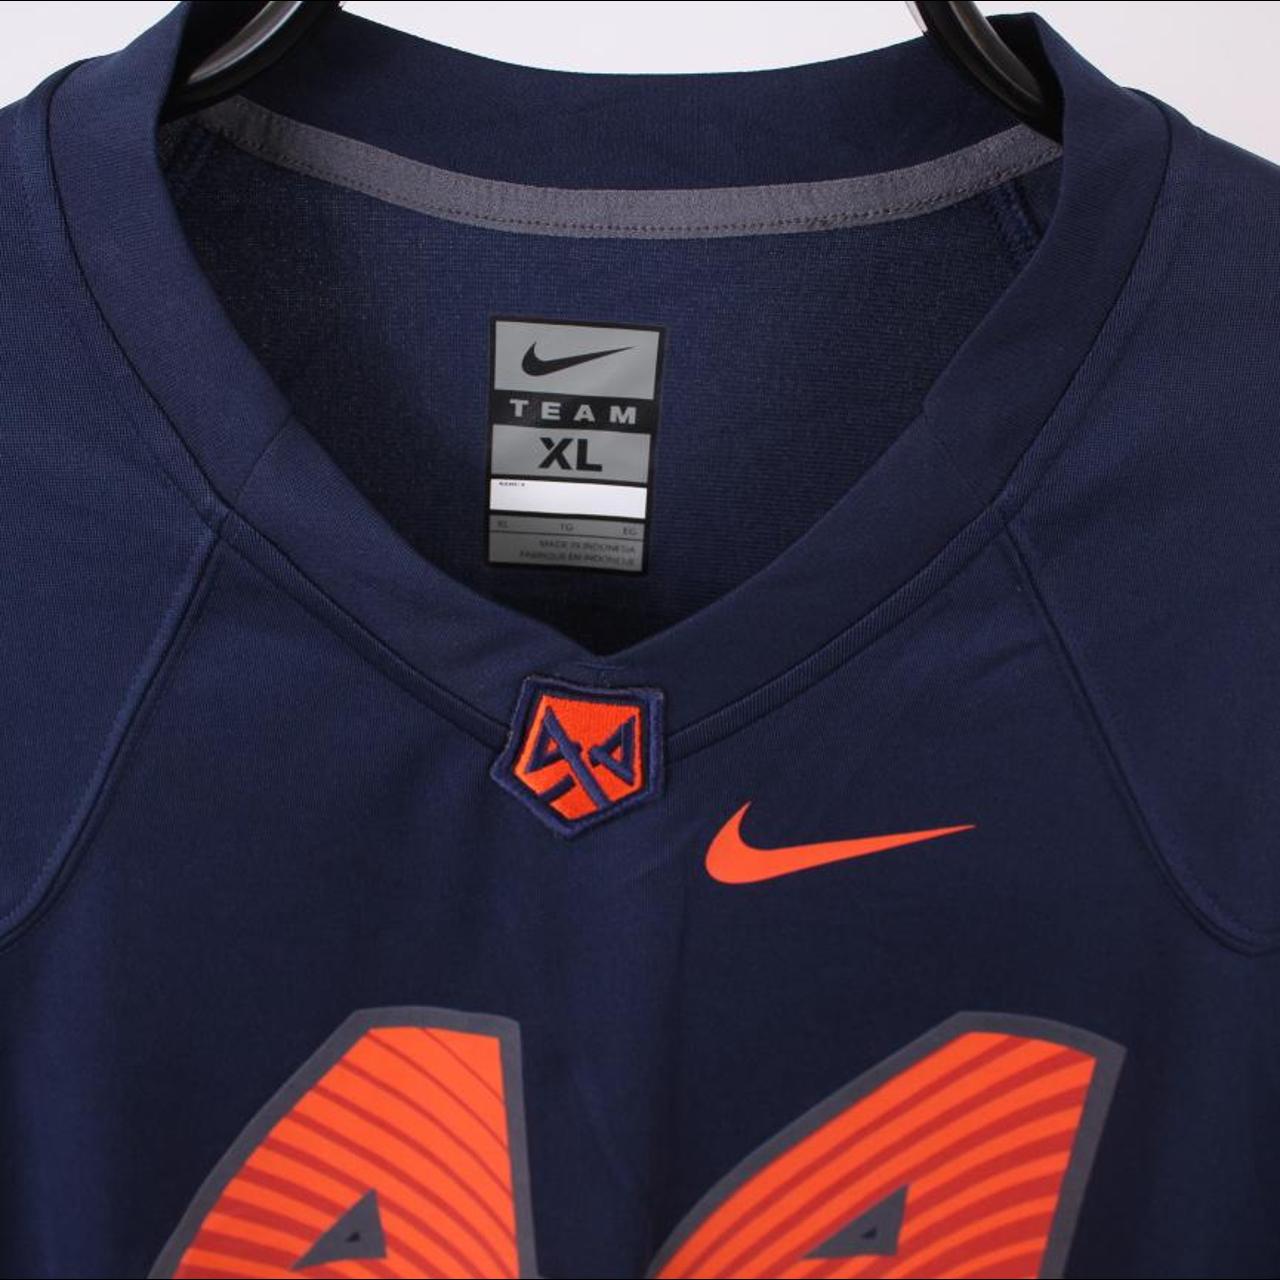 Product Image 3 - Nike American football jersey 
Colour: